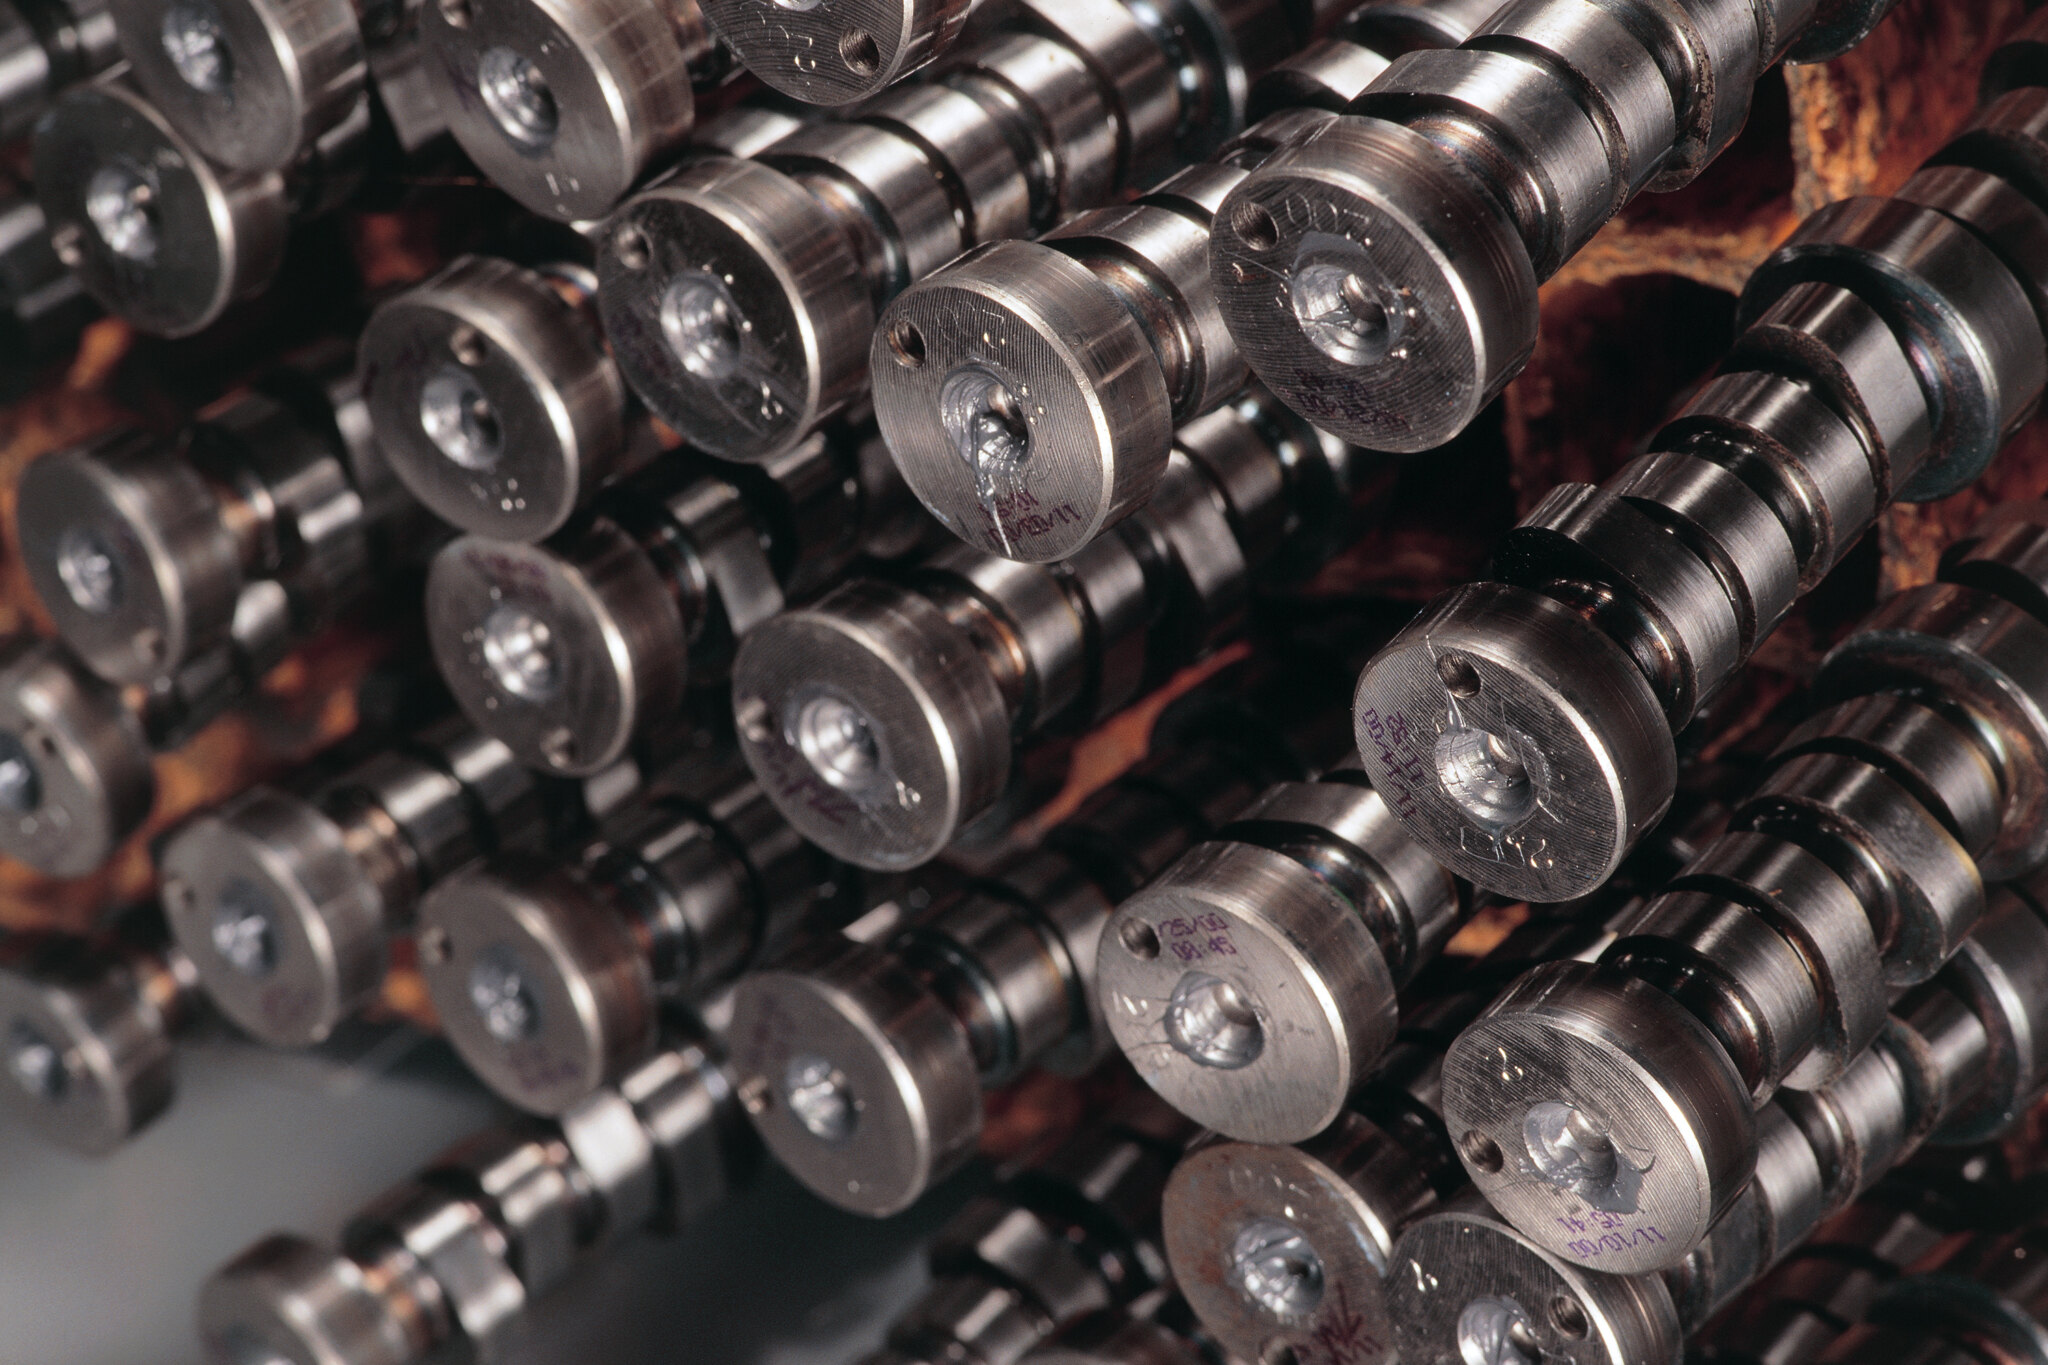 Tech: understanding how camshafts work and the terminology